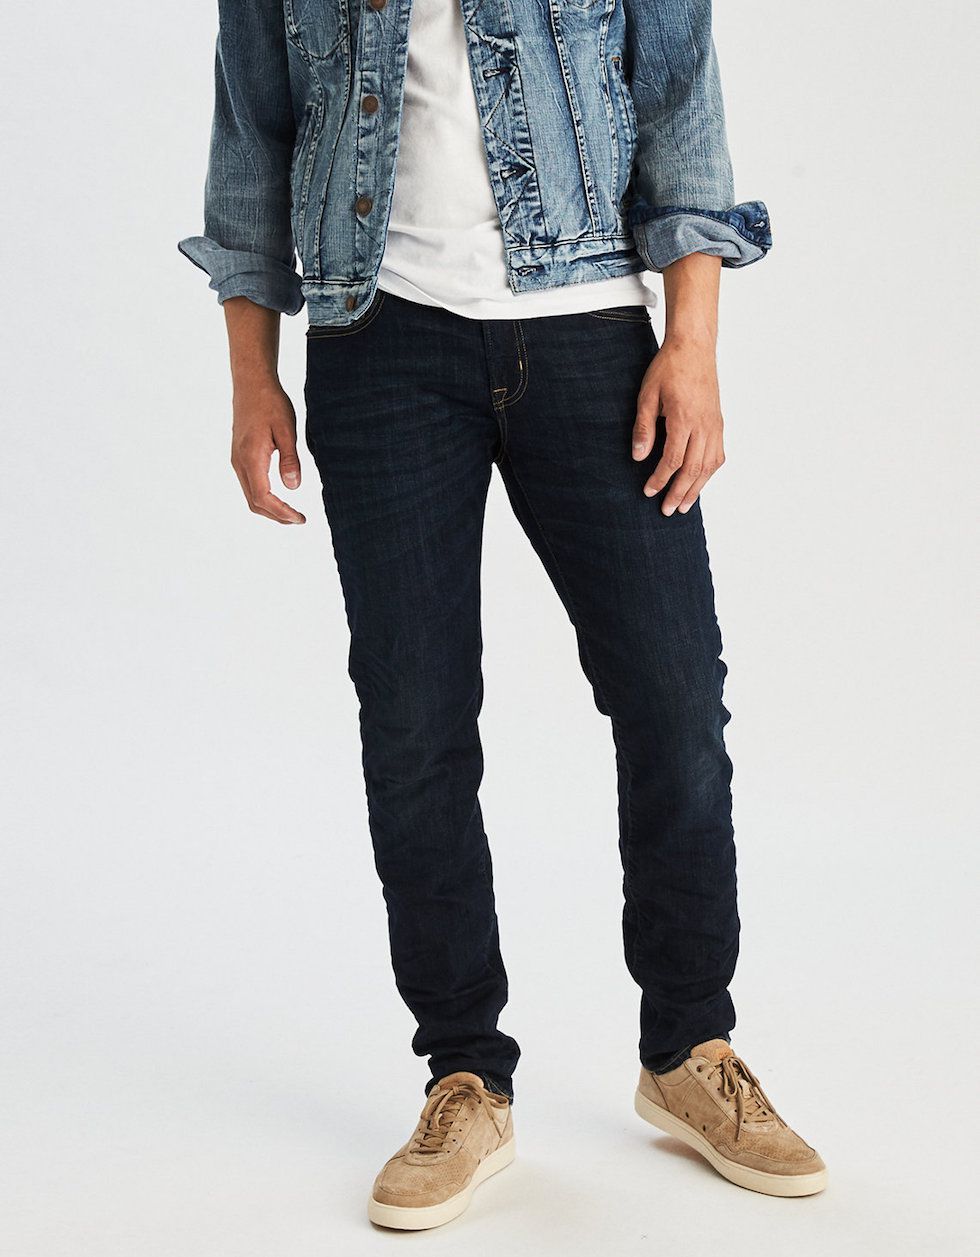 Åh gud melodisk Astrolabe This American Eagle Jeans Sale Means Denim for $29